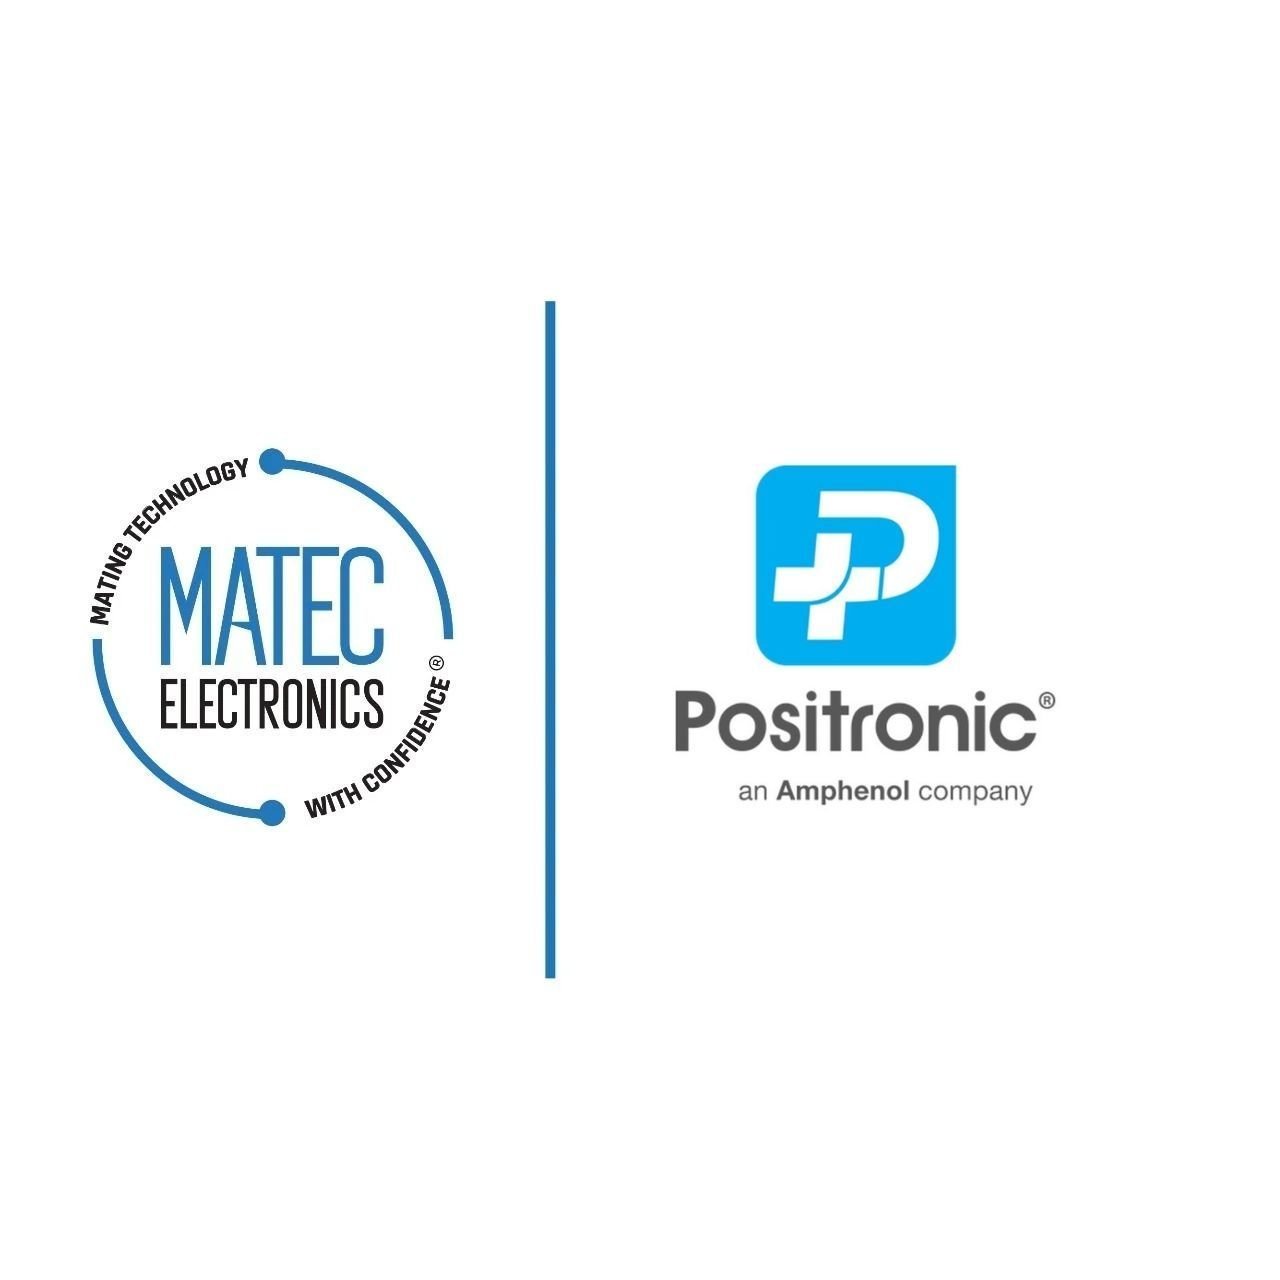 Matec Electronics is now joining forces with POSITRONIC!